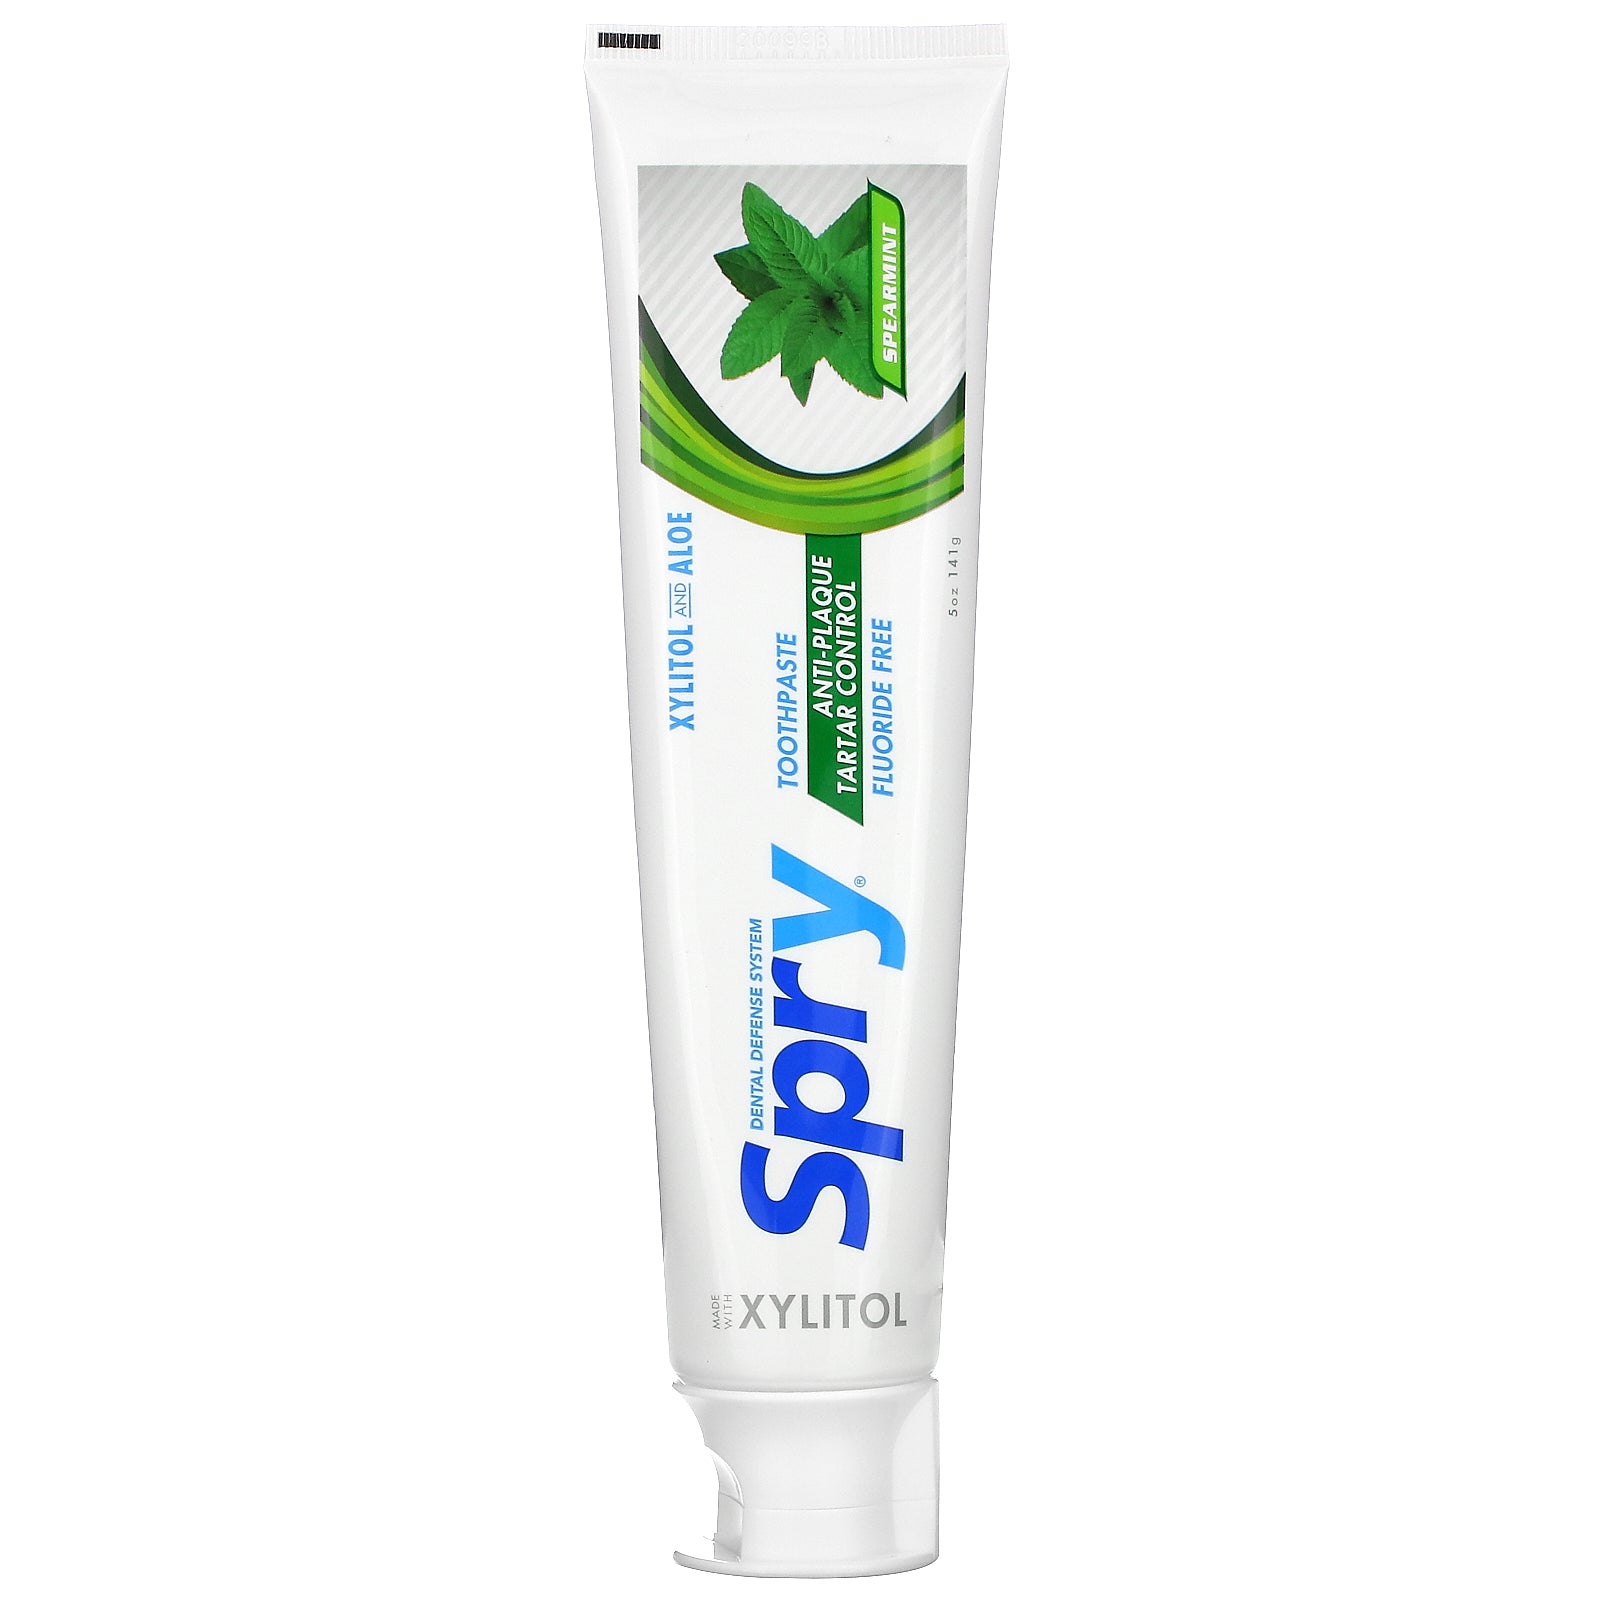 Xlear, Natural Spry Toothpaste, Anti-Plaque Tartar Control, Fluoride Free, Spearmint, 5 oz (141 g)